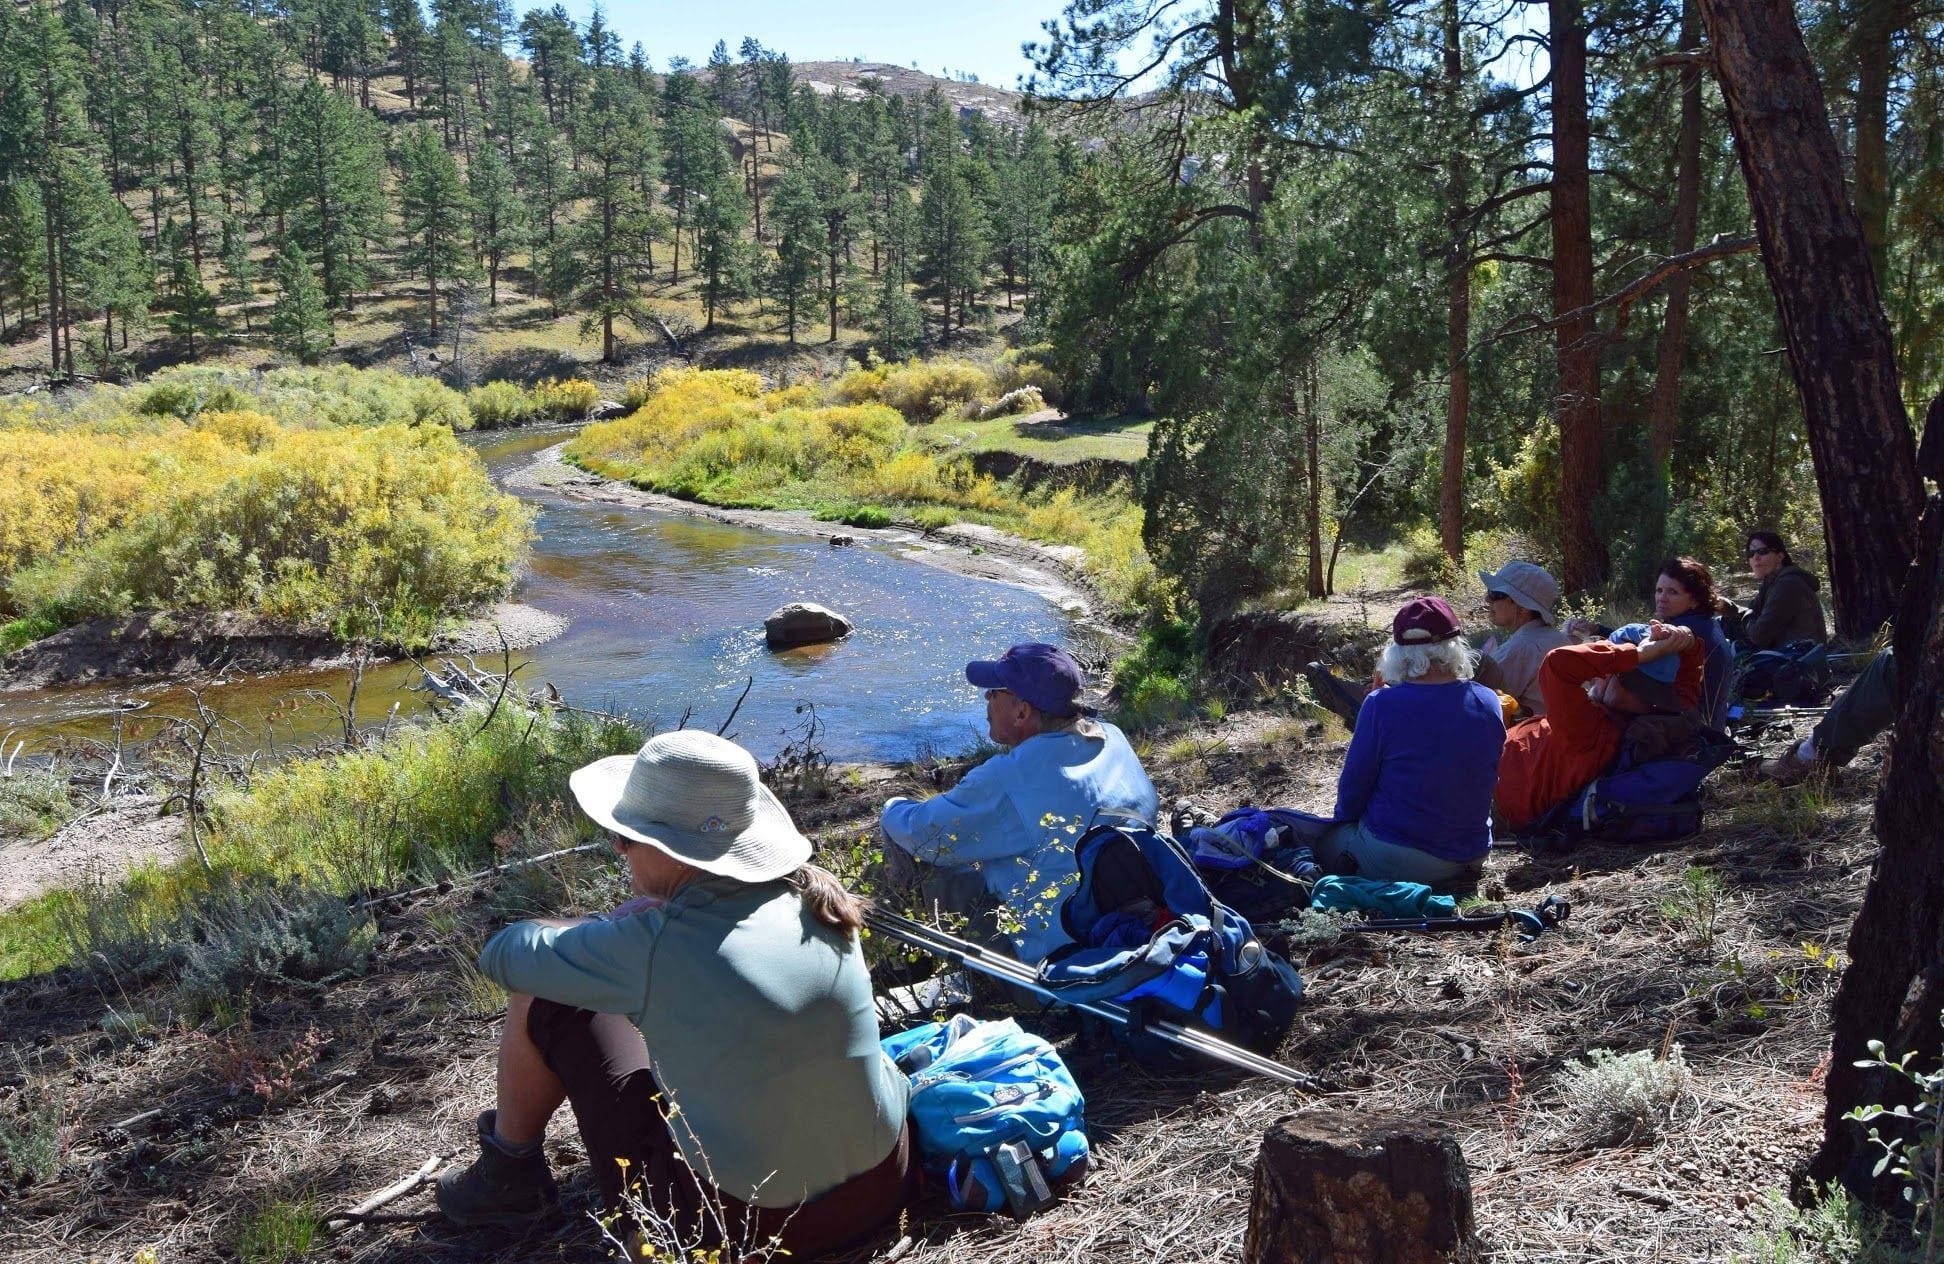 Hikers sitting on bank above S Platte River